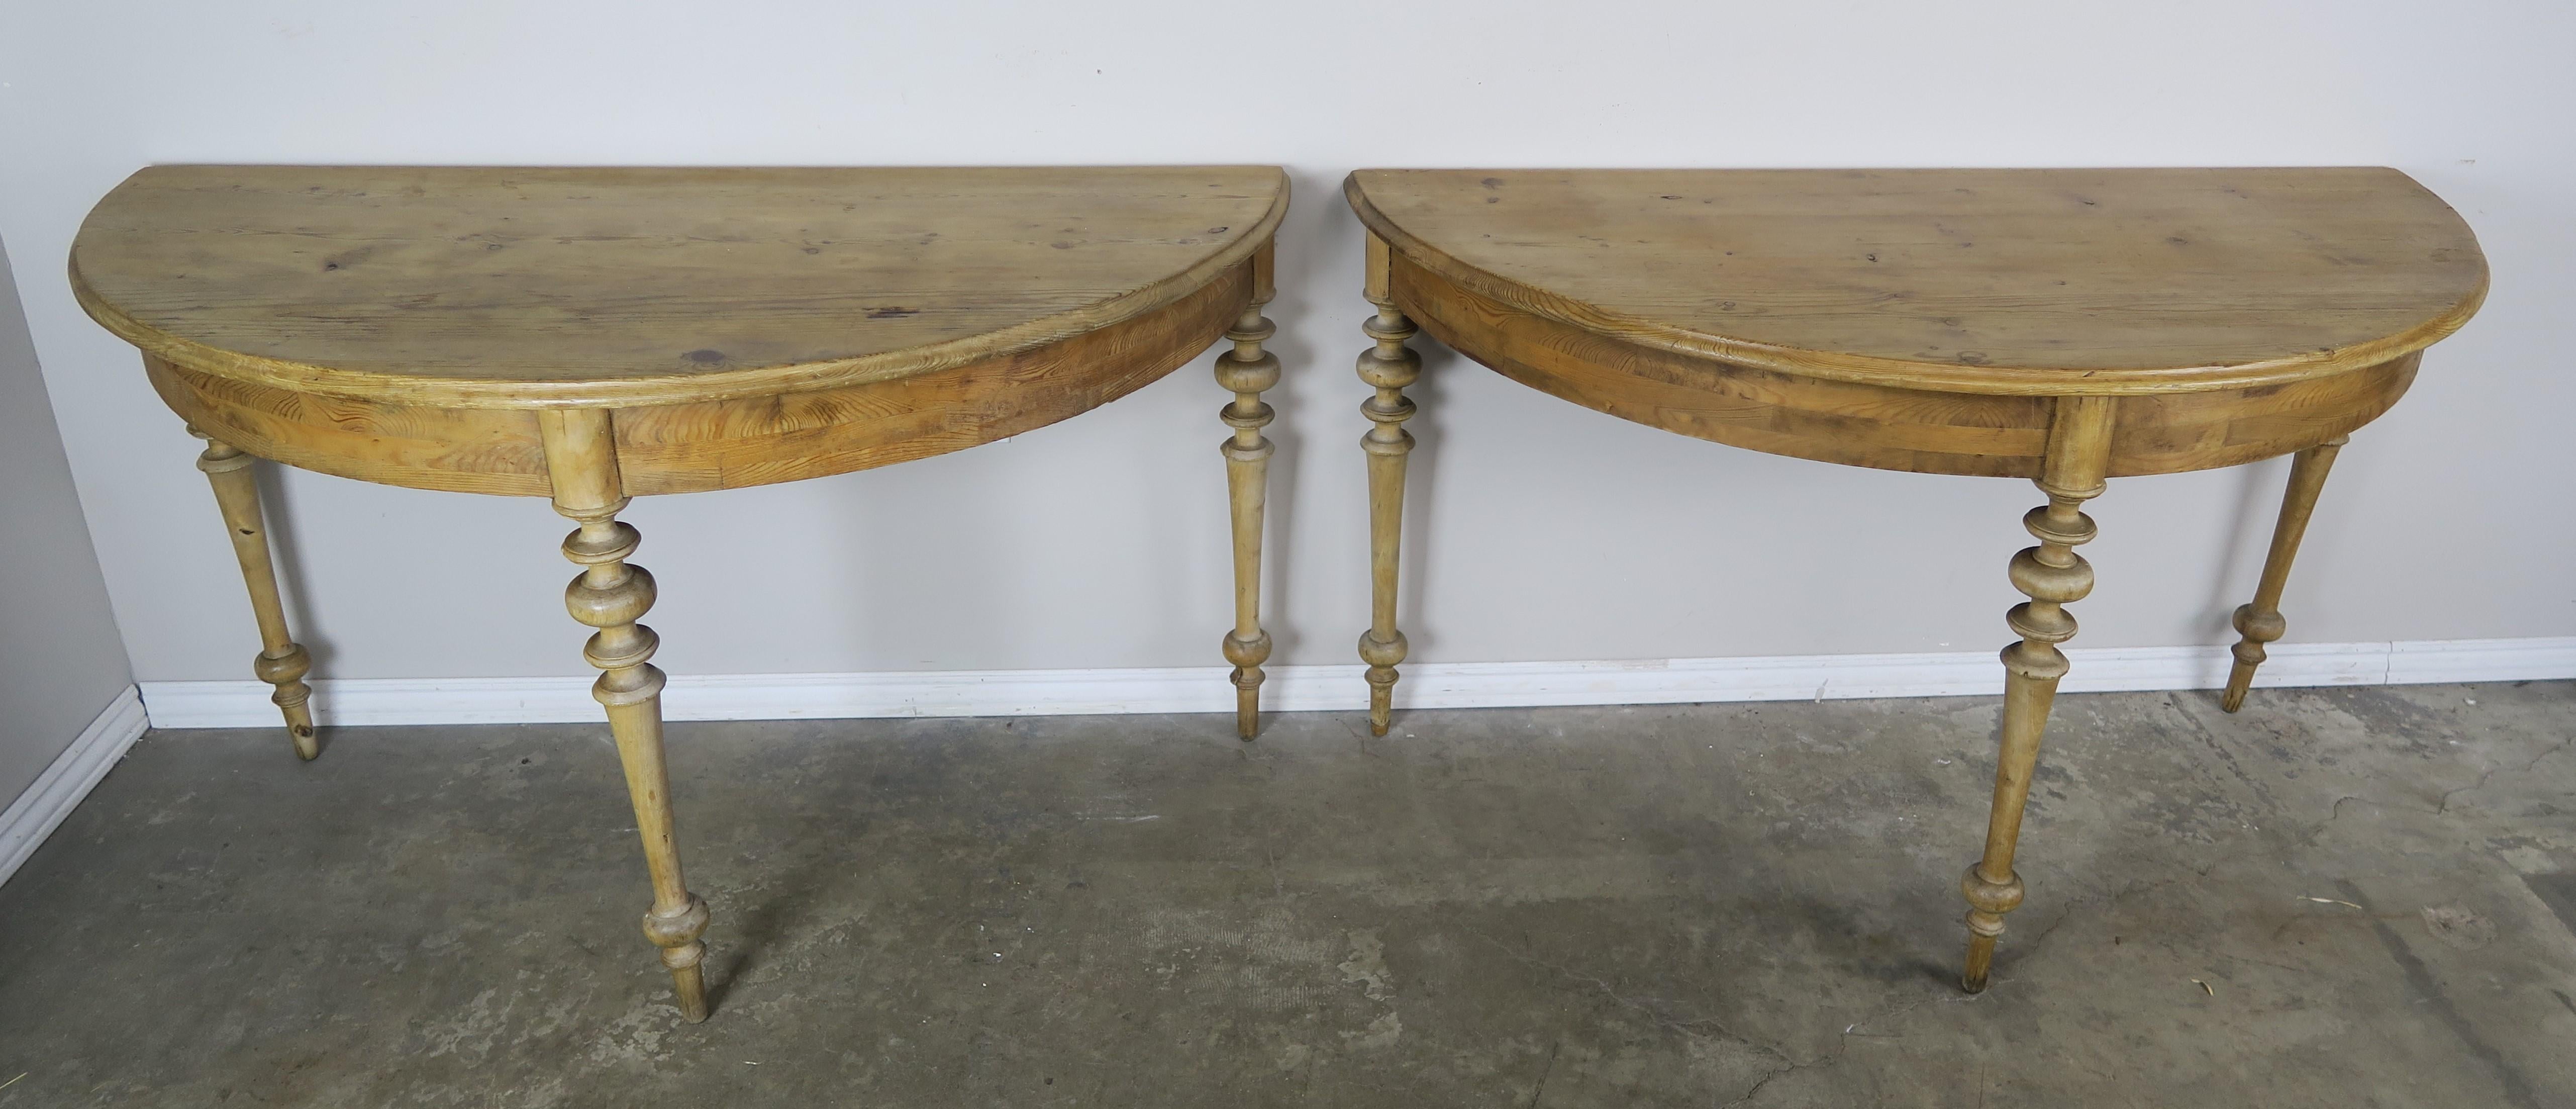 Pair of 19th century Swedish pine wood consoles standing on three beautiful turned straight legs. The consoles have original hardware that attaches tables together to form a single round table.